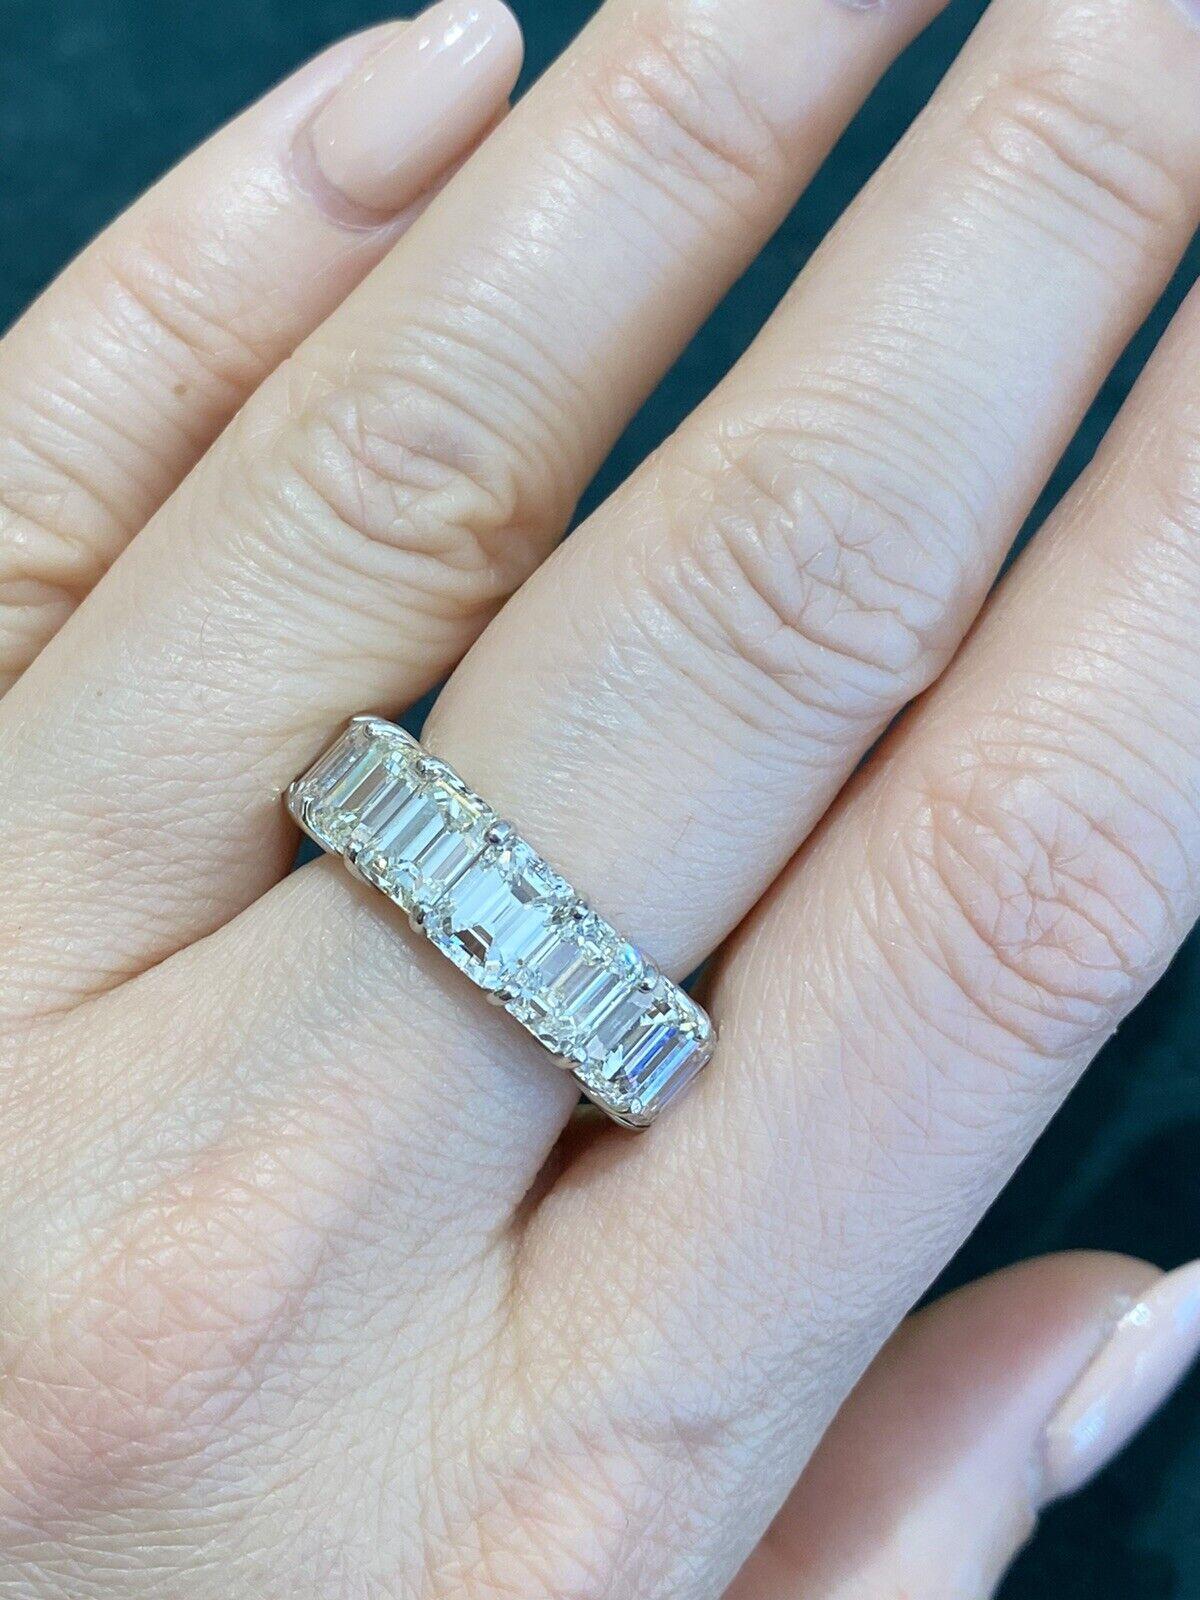 15.16 Cts. Emerald Cut Diamond Eternity Band Ring in Platinum In Excellent Condition For Sale In La Jolla, CA